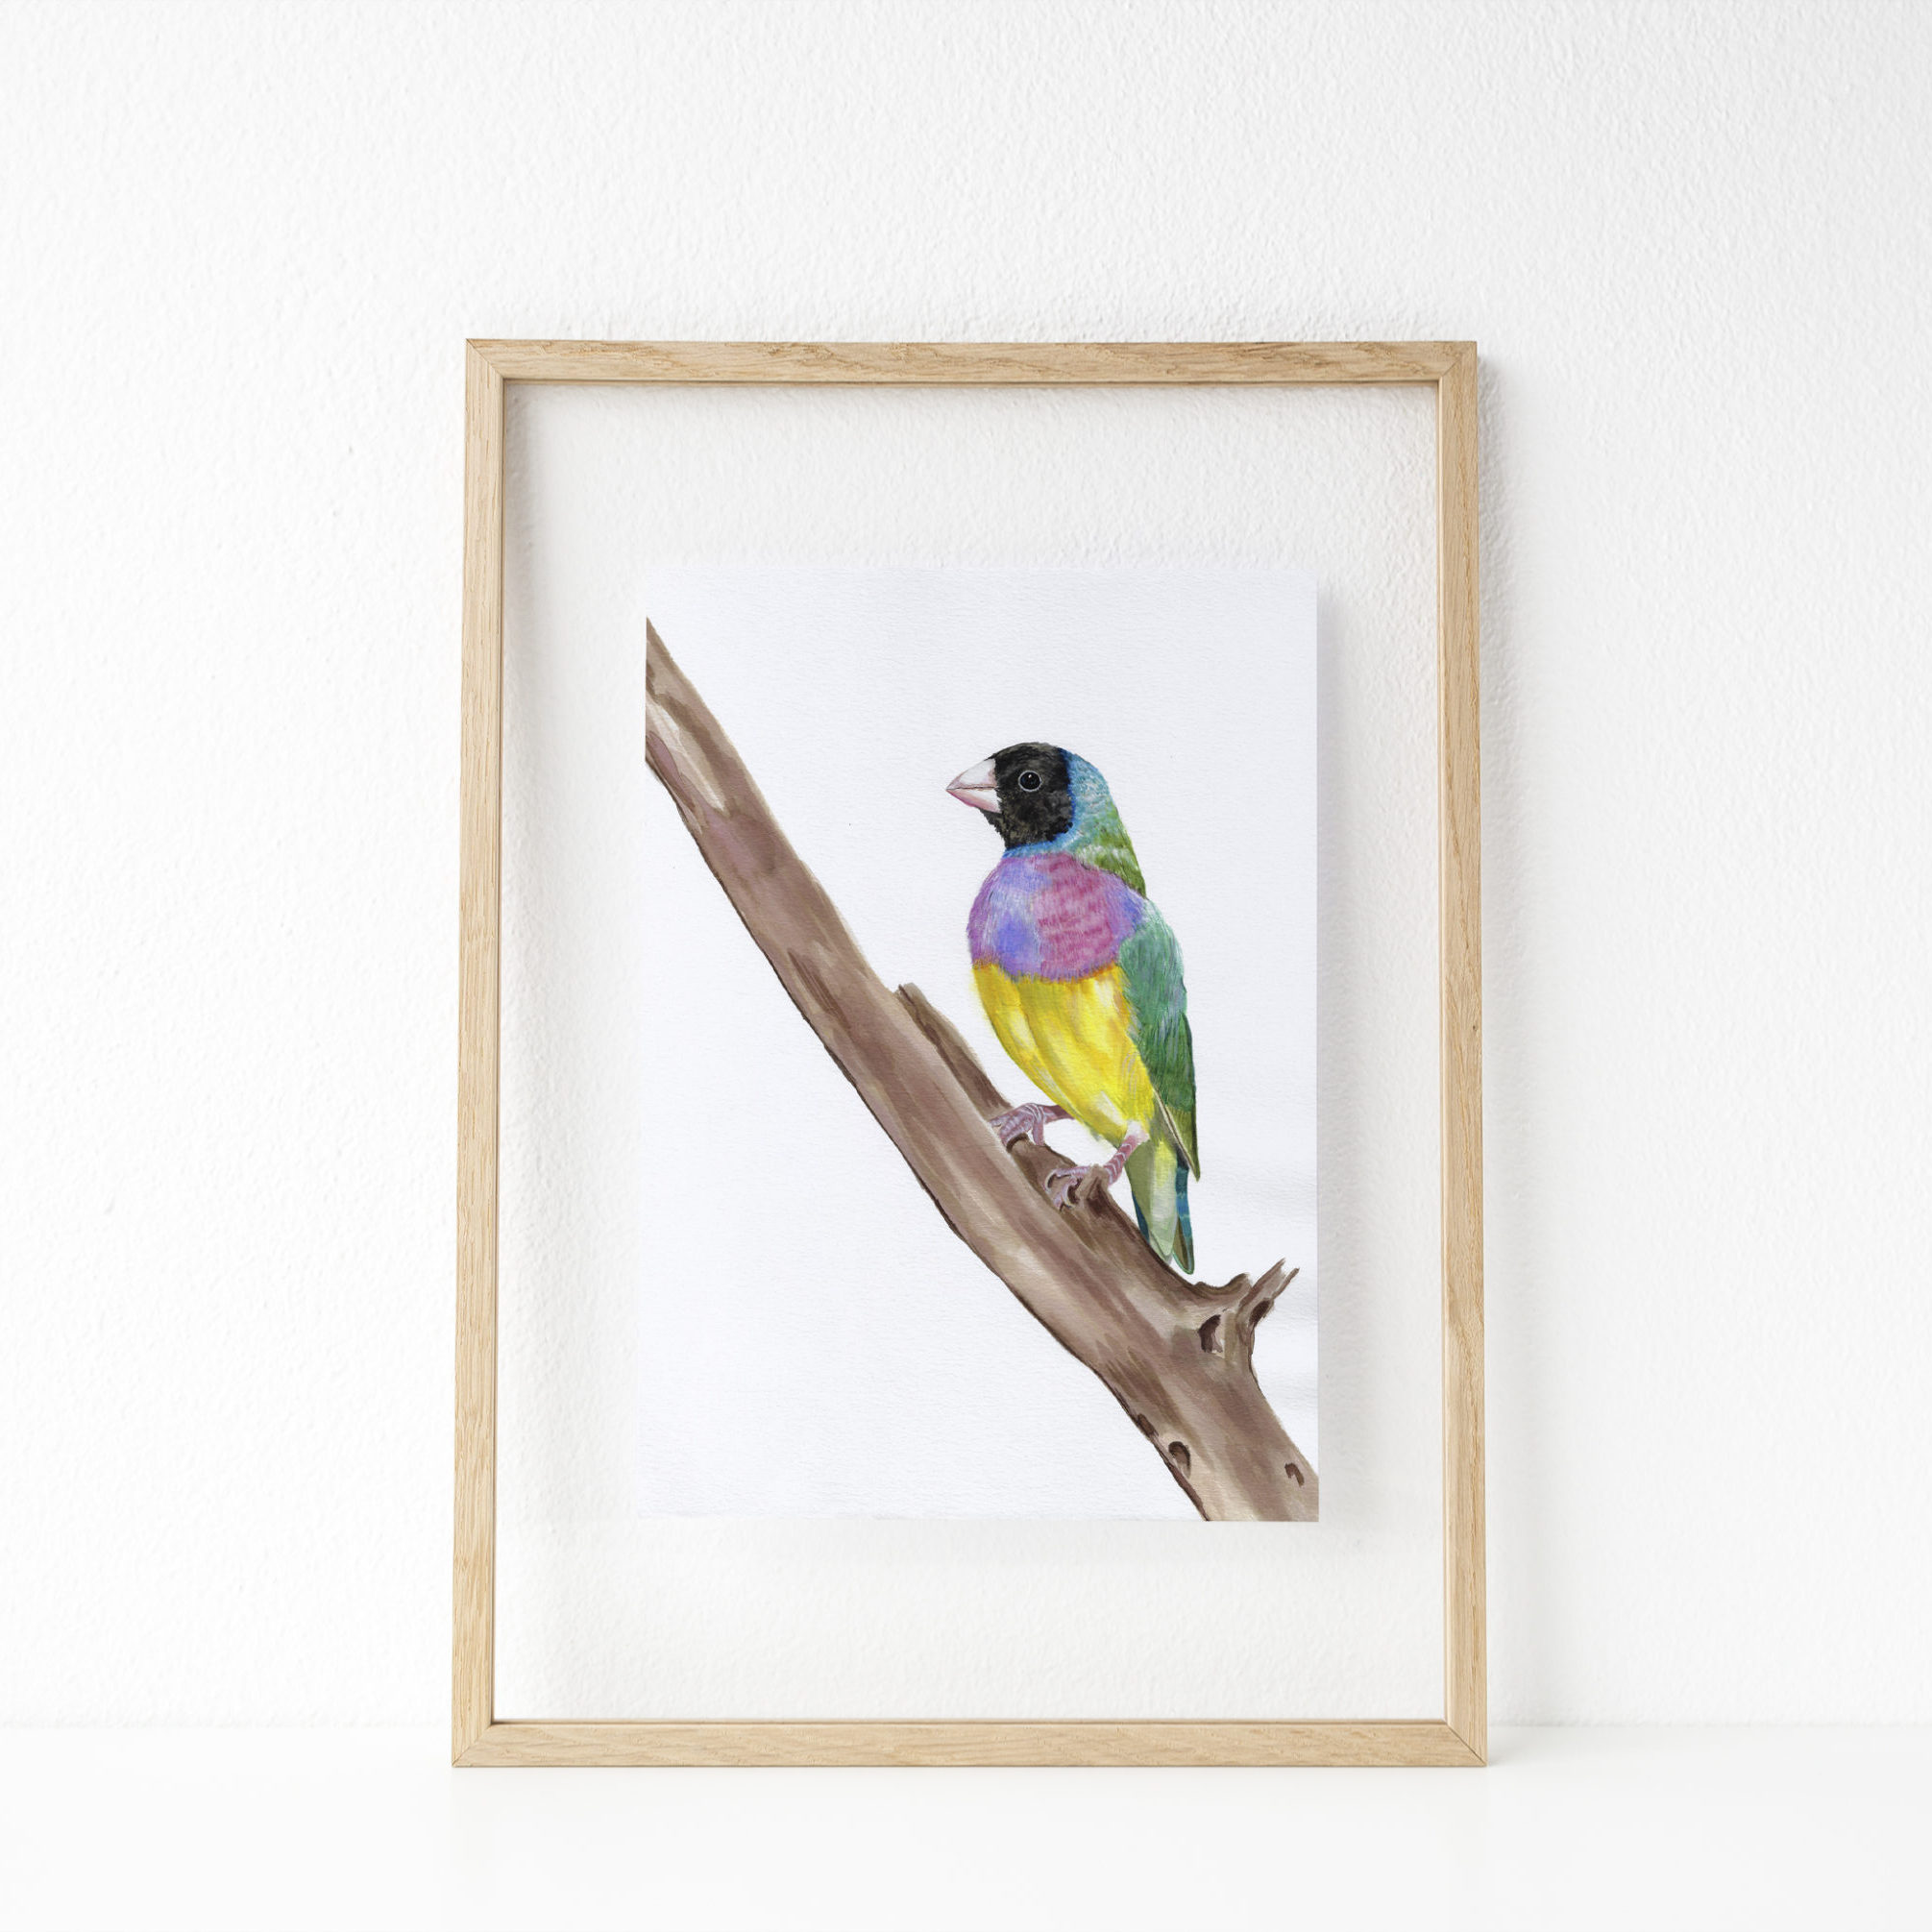 watercolor painting of a purple, yellow, blue and green bird (Gouldian Finch) perched on a branch in a wooden frame